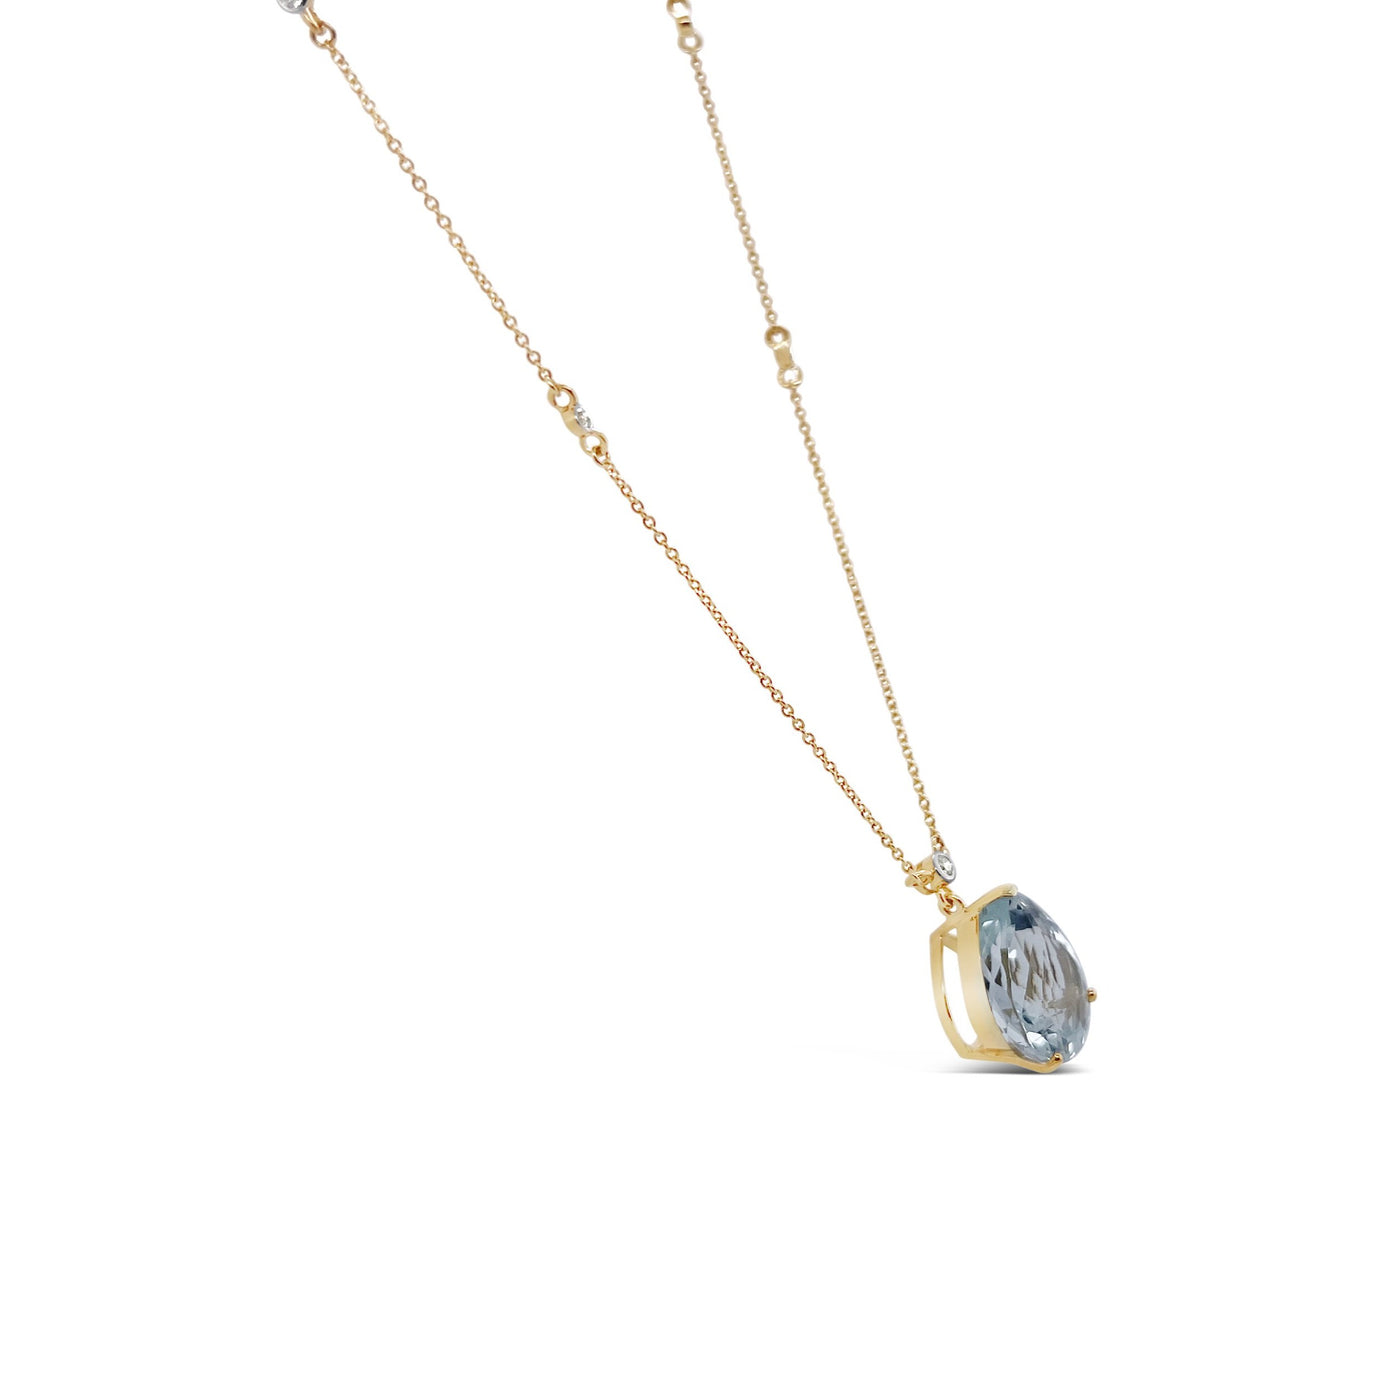 18CT Yellow Gold Aquamarine and Diamond Pendant and Necklace